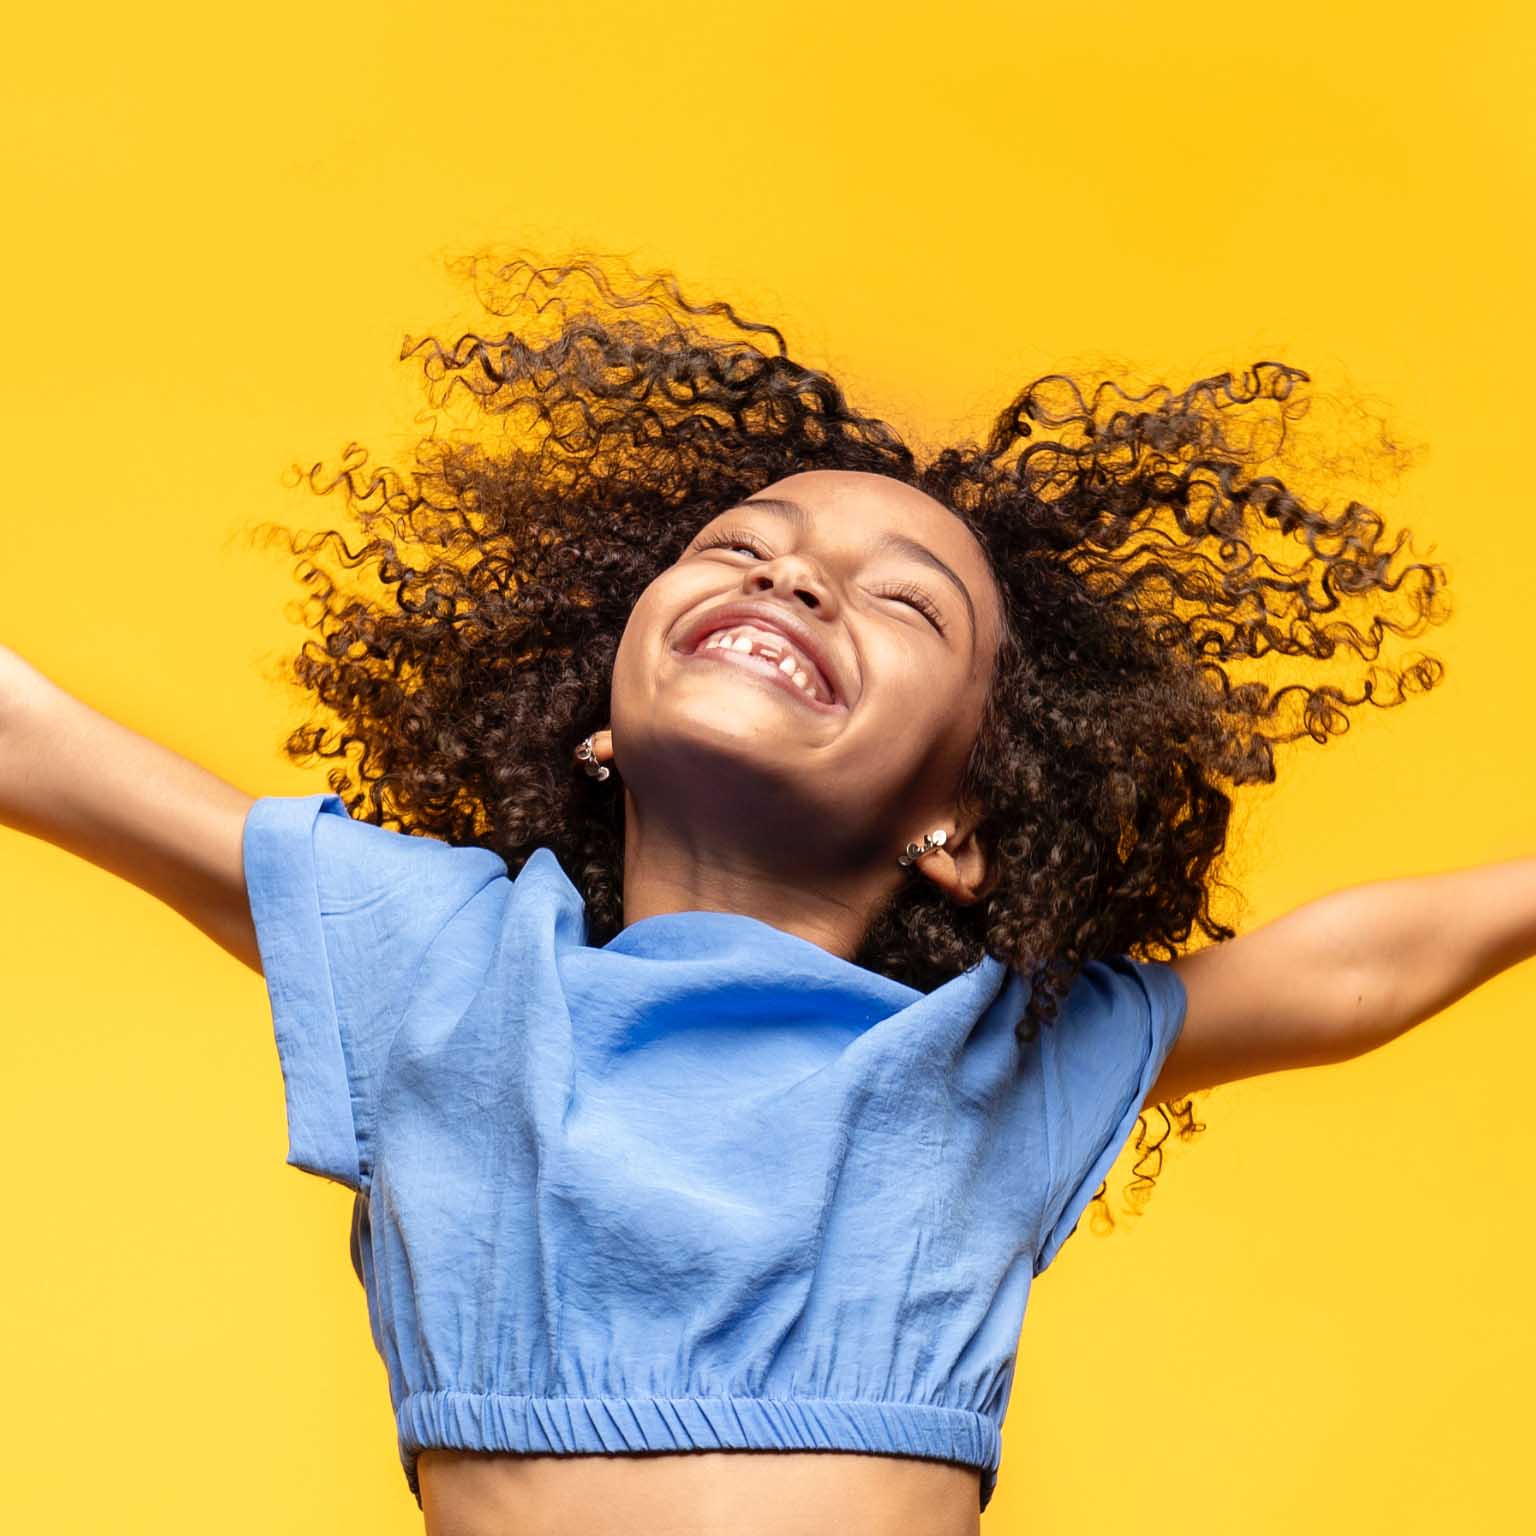 A child jumps for joy with outstretched arms and a happy smile